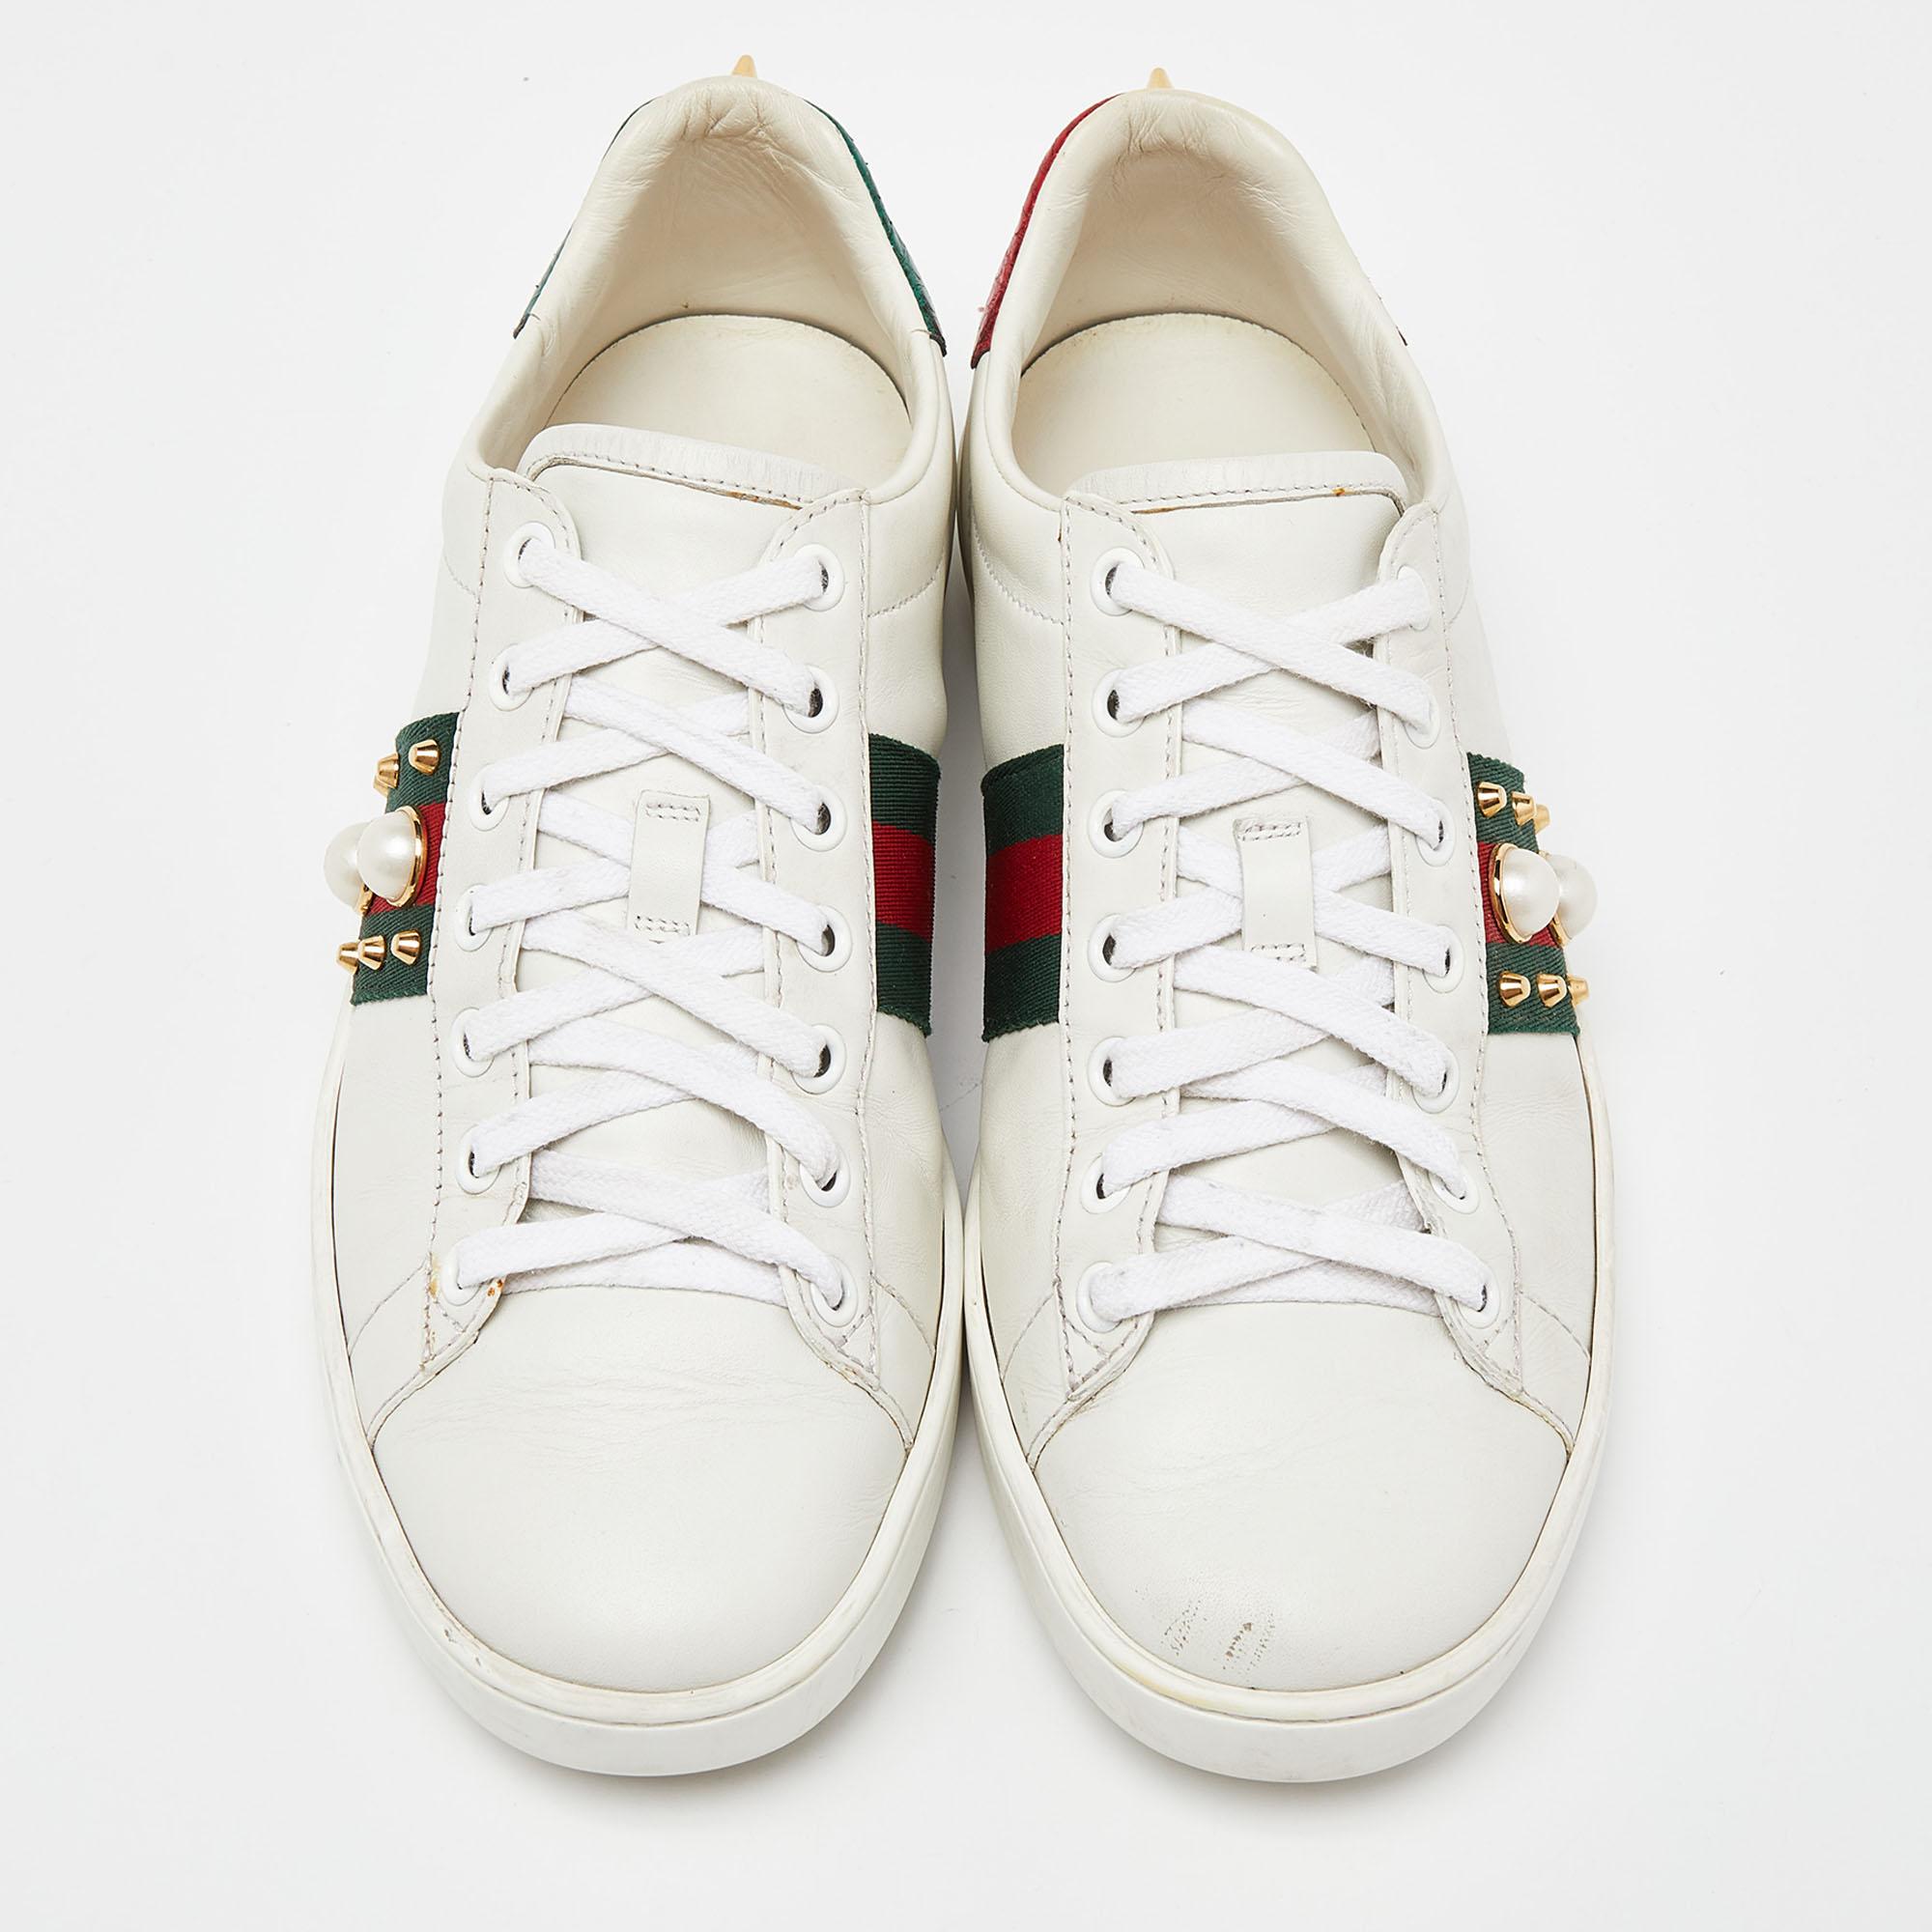 Coming in a classic silhouette, these designer sneakers are a seamless combination of luxury, comfort, and style. These sneakers are finished with signature details and comfortable insoles.

Includes: Original Dustbag, Original Box

